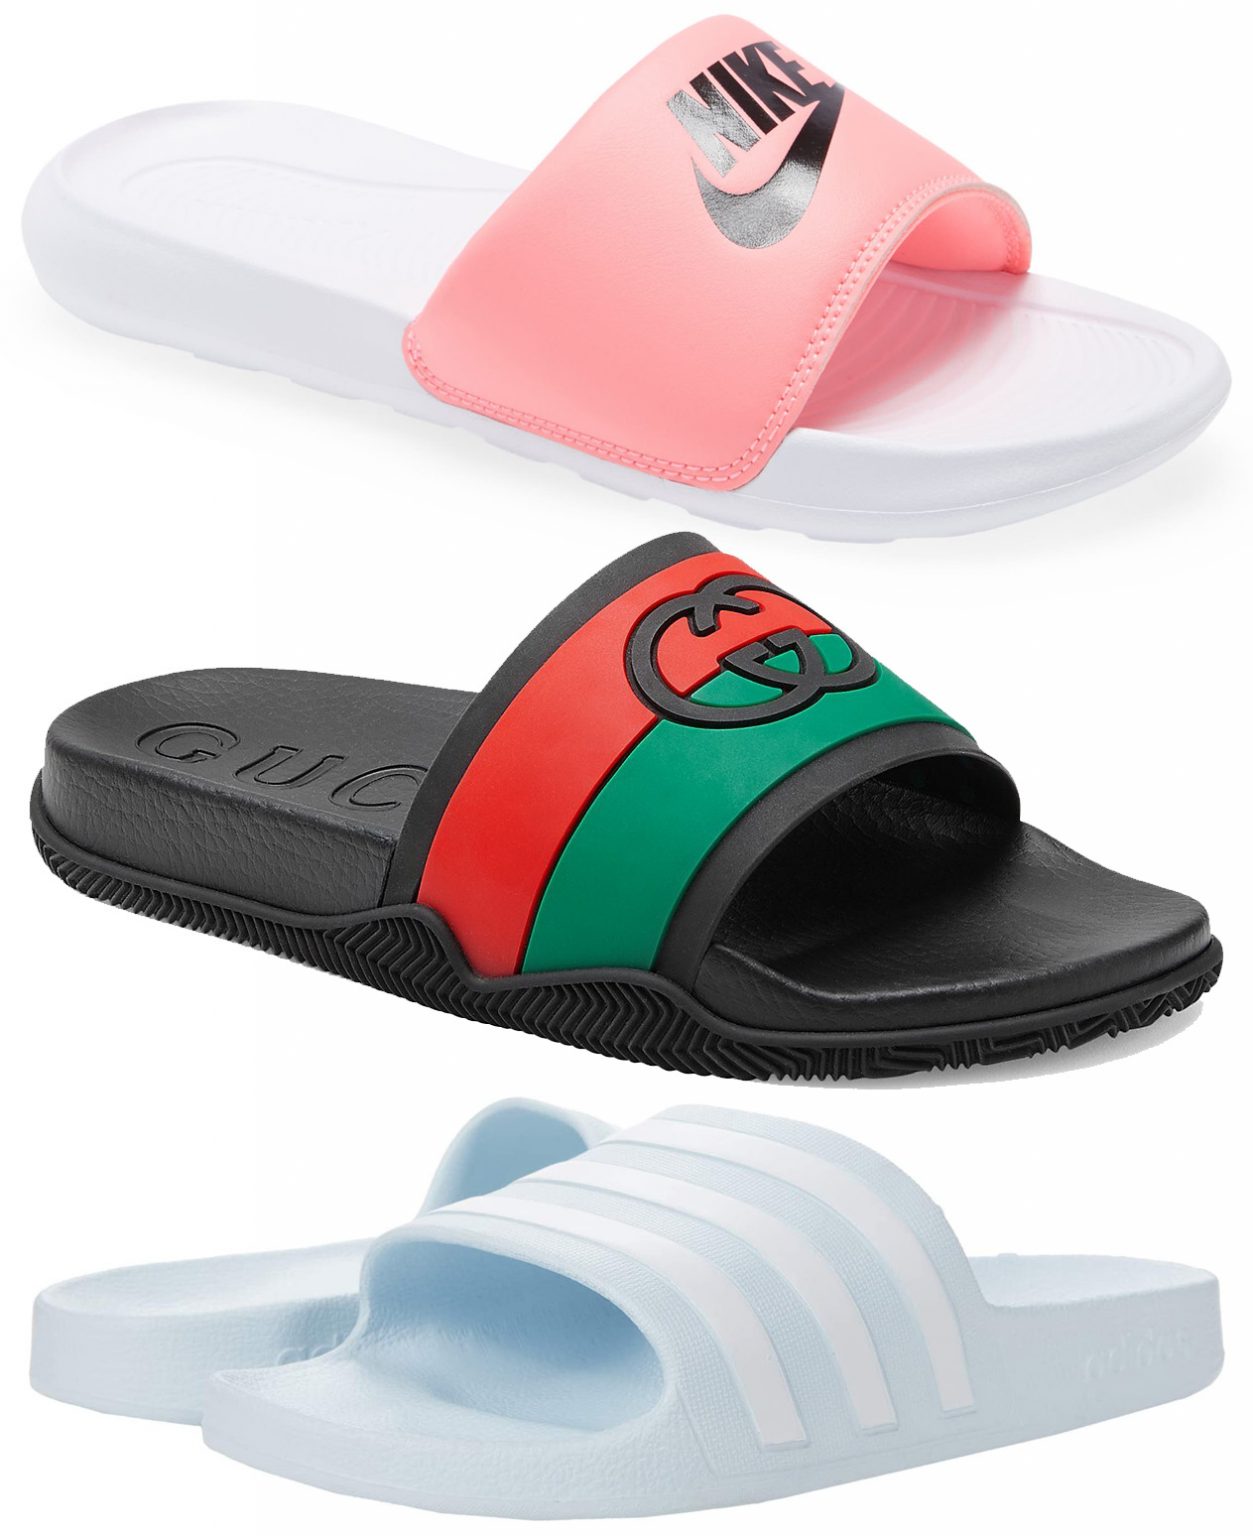 9 Trending Summer Sandal Trends and 5 Sandals You Need